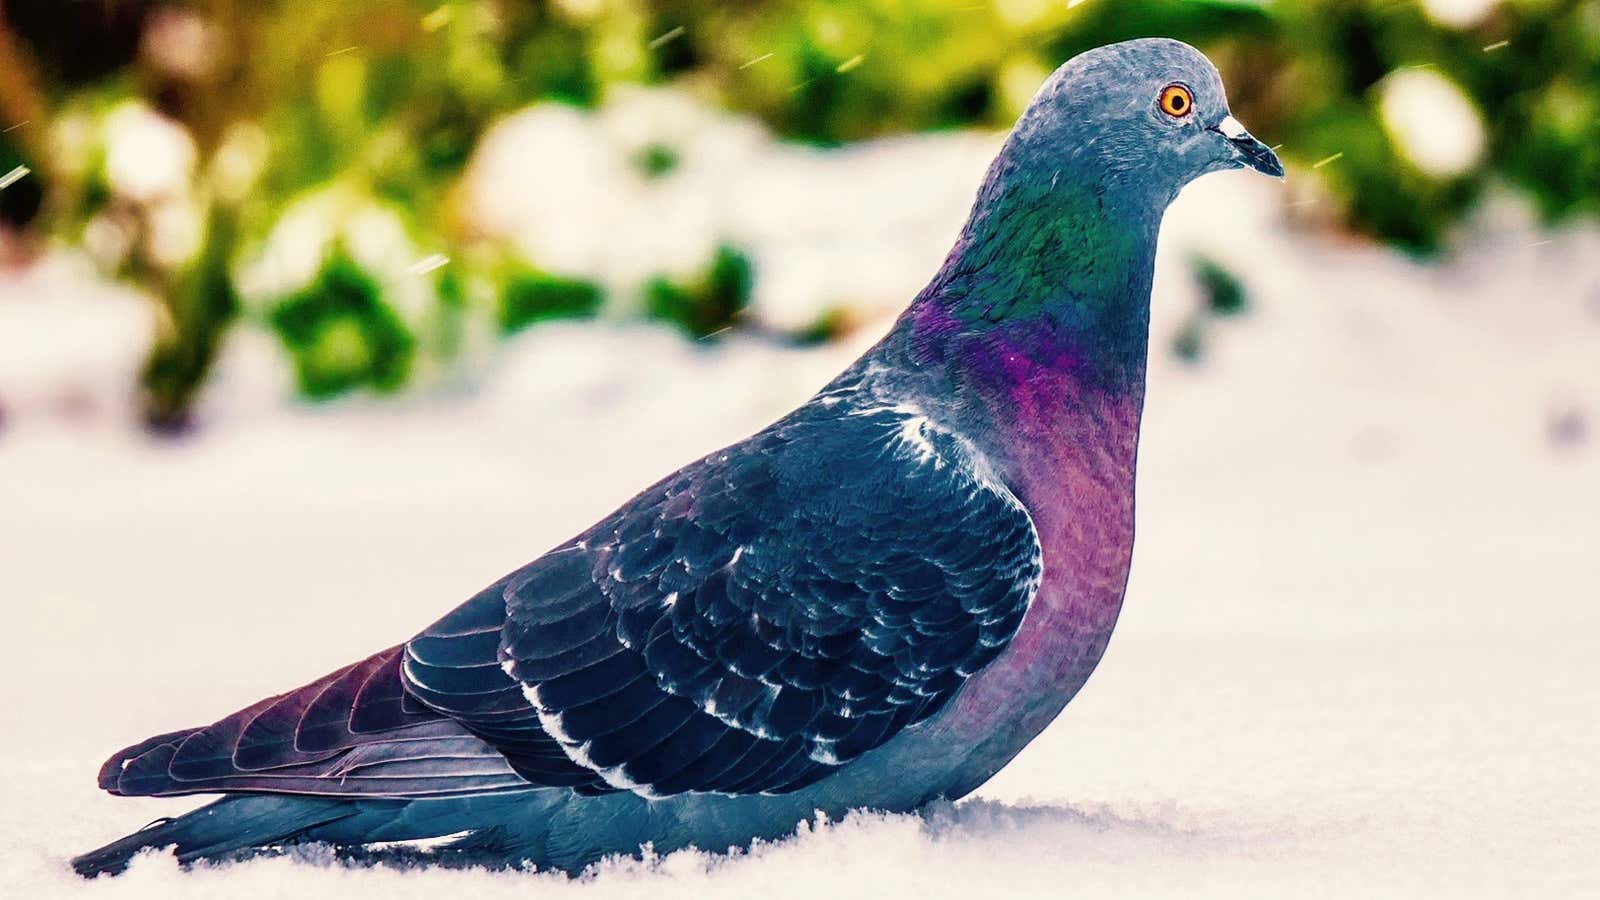 This pigeon may be processing complex abstractions right now.